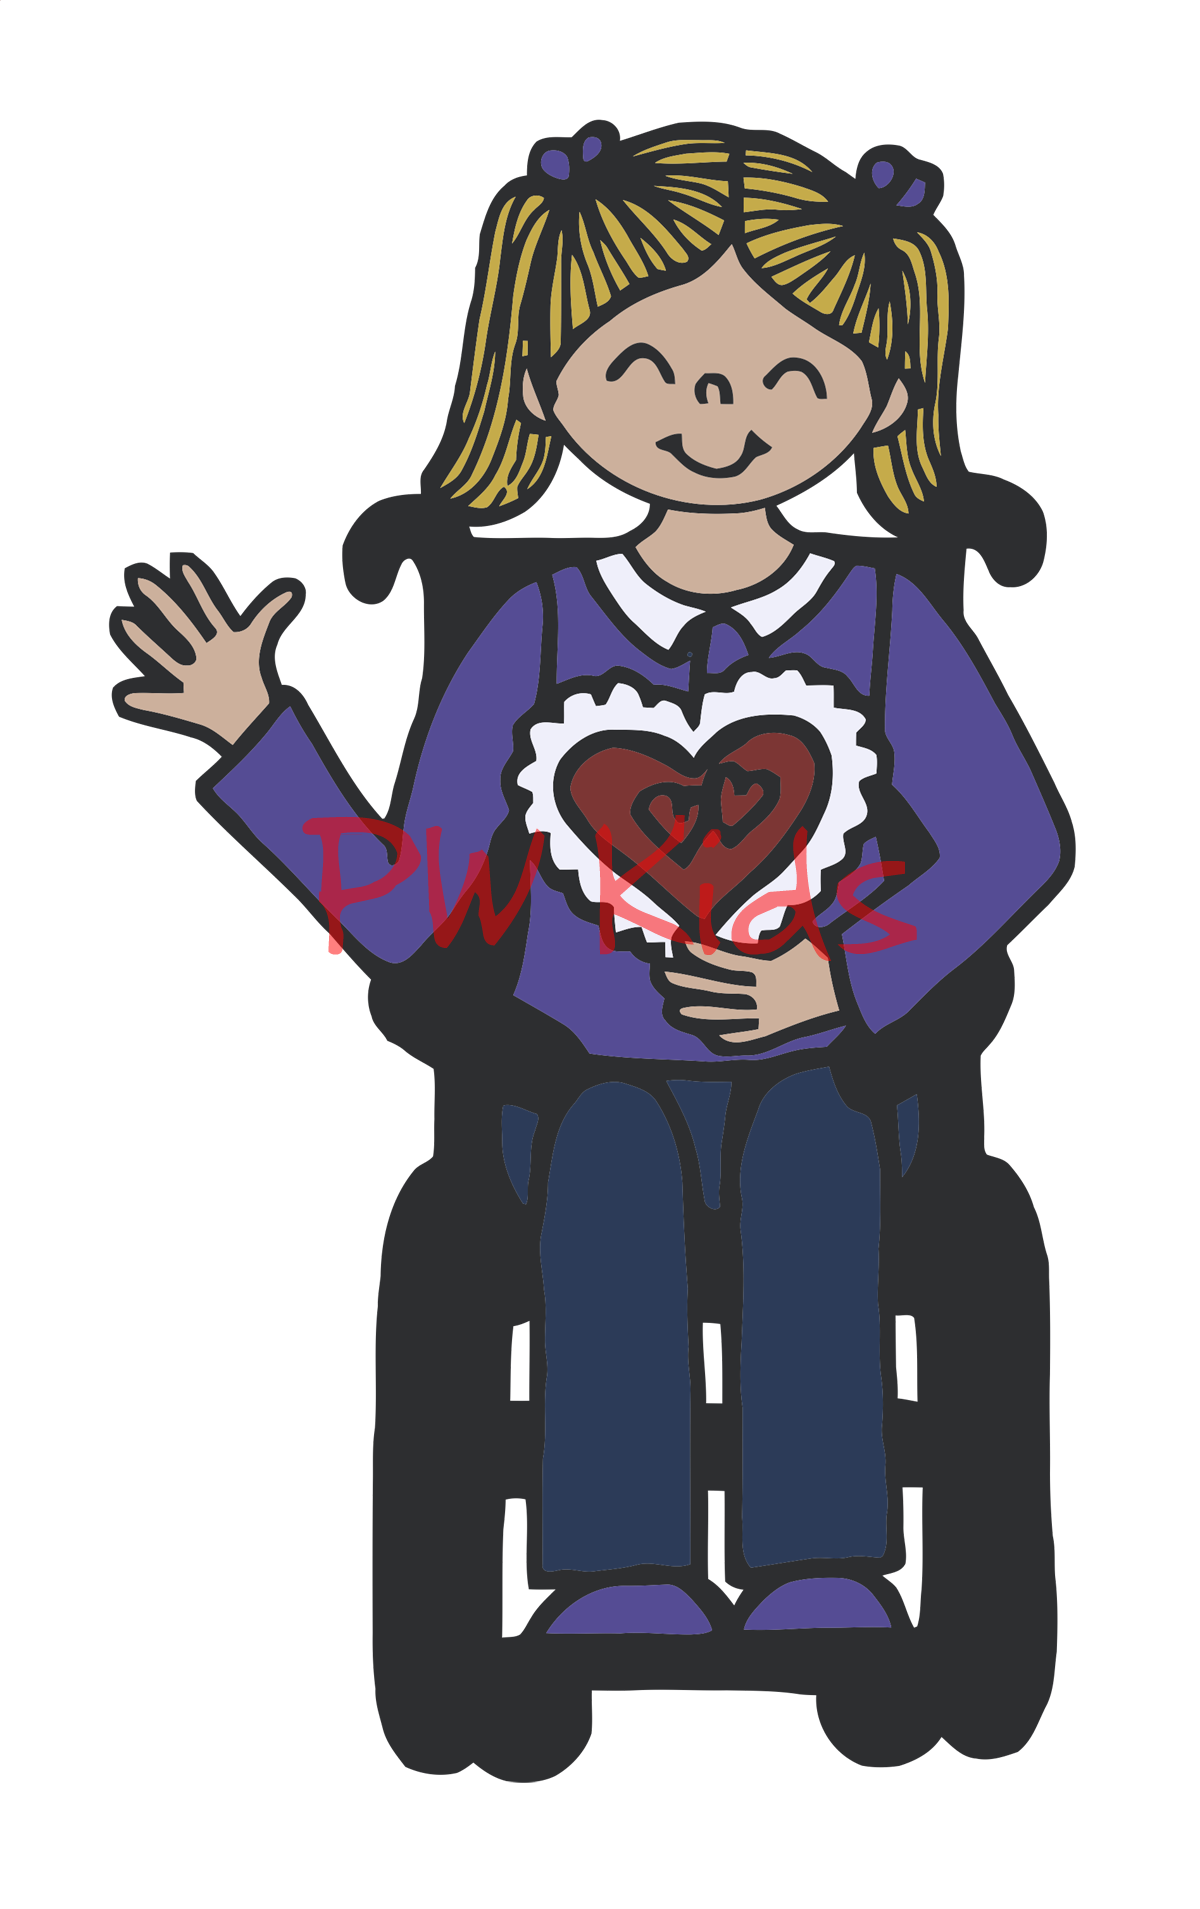 Community clipart recreational therapist. Collection of free disabilities